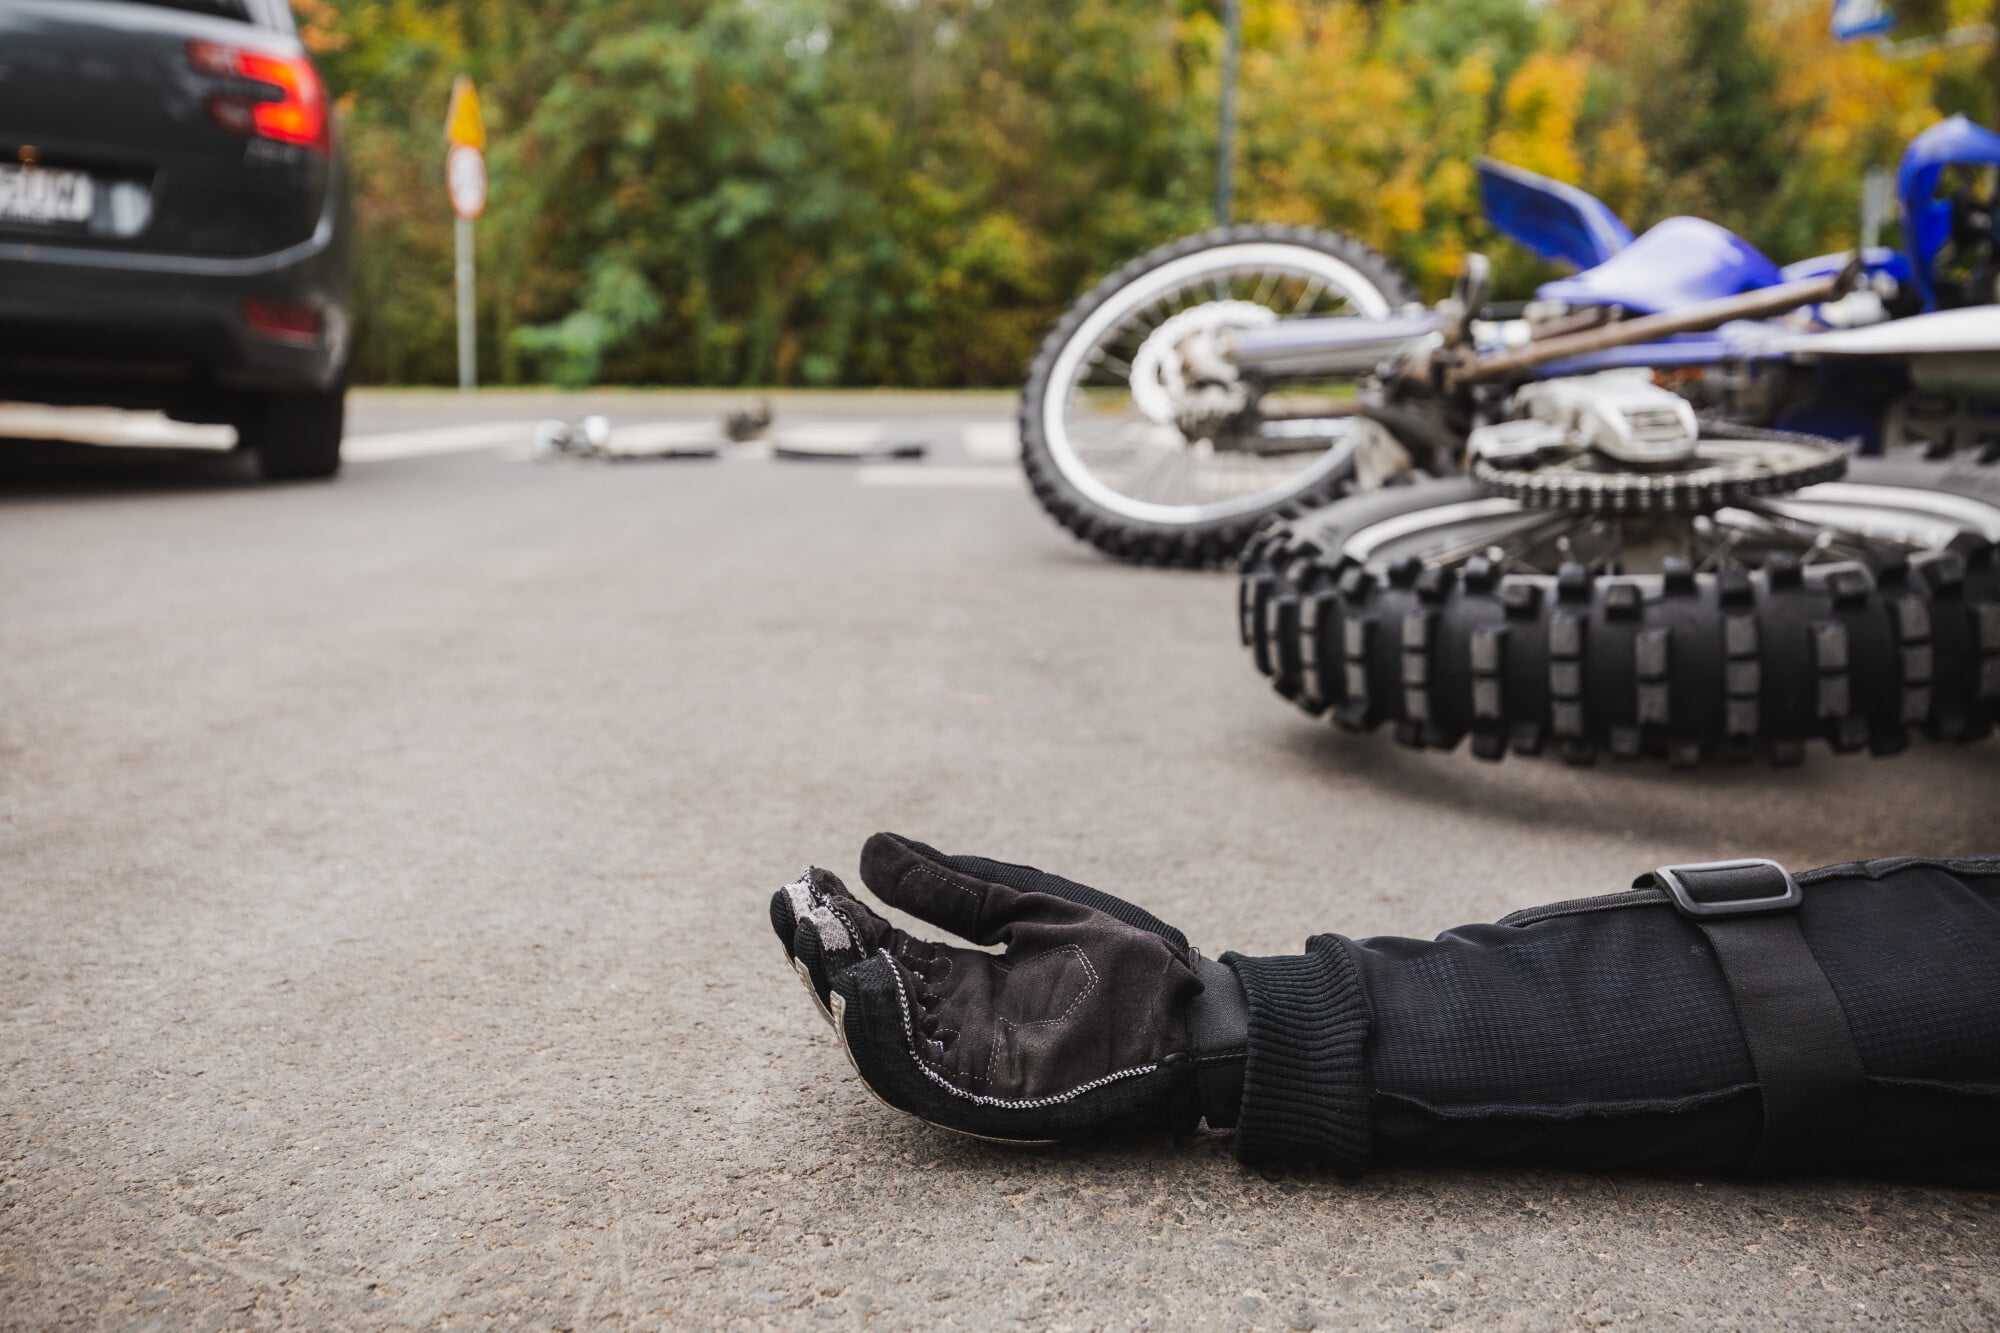 If you have recently been in a motorcycle accident, then you may want to consider seeking legal help. This is why you should hire an attorney.